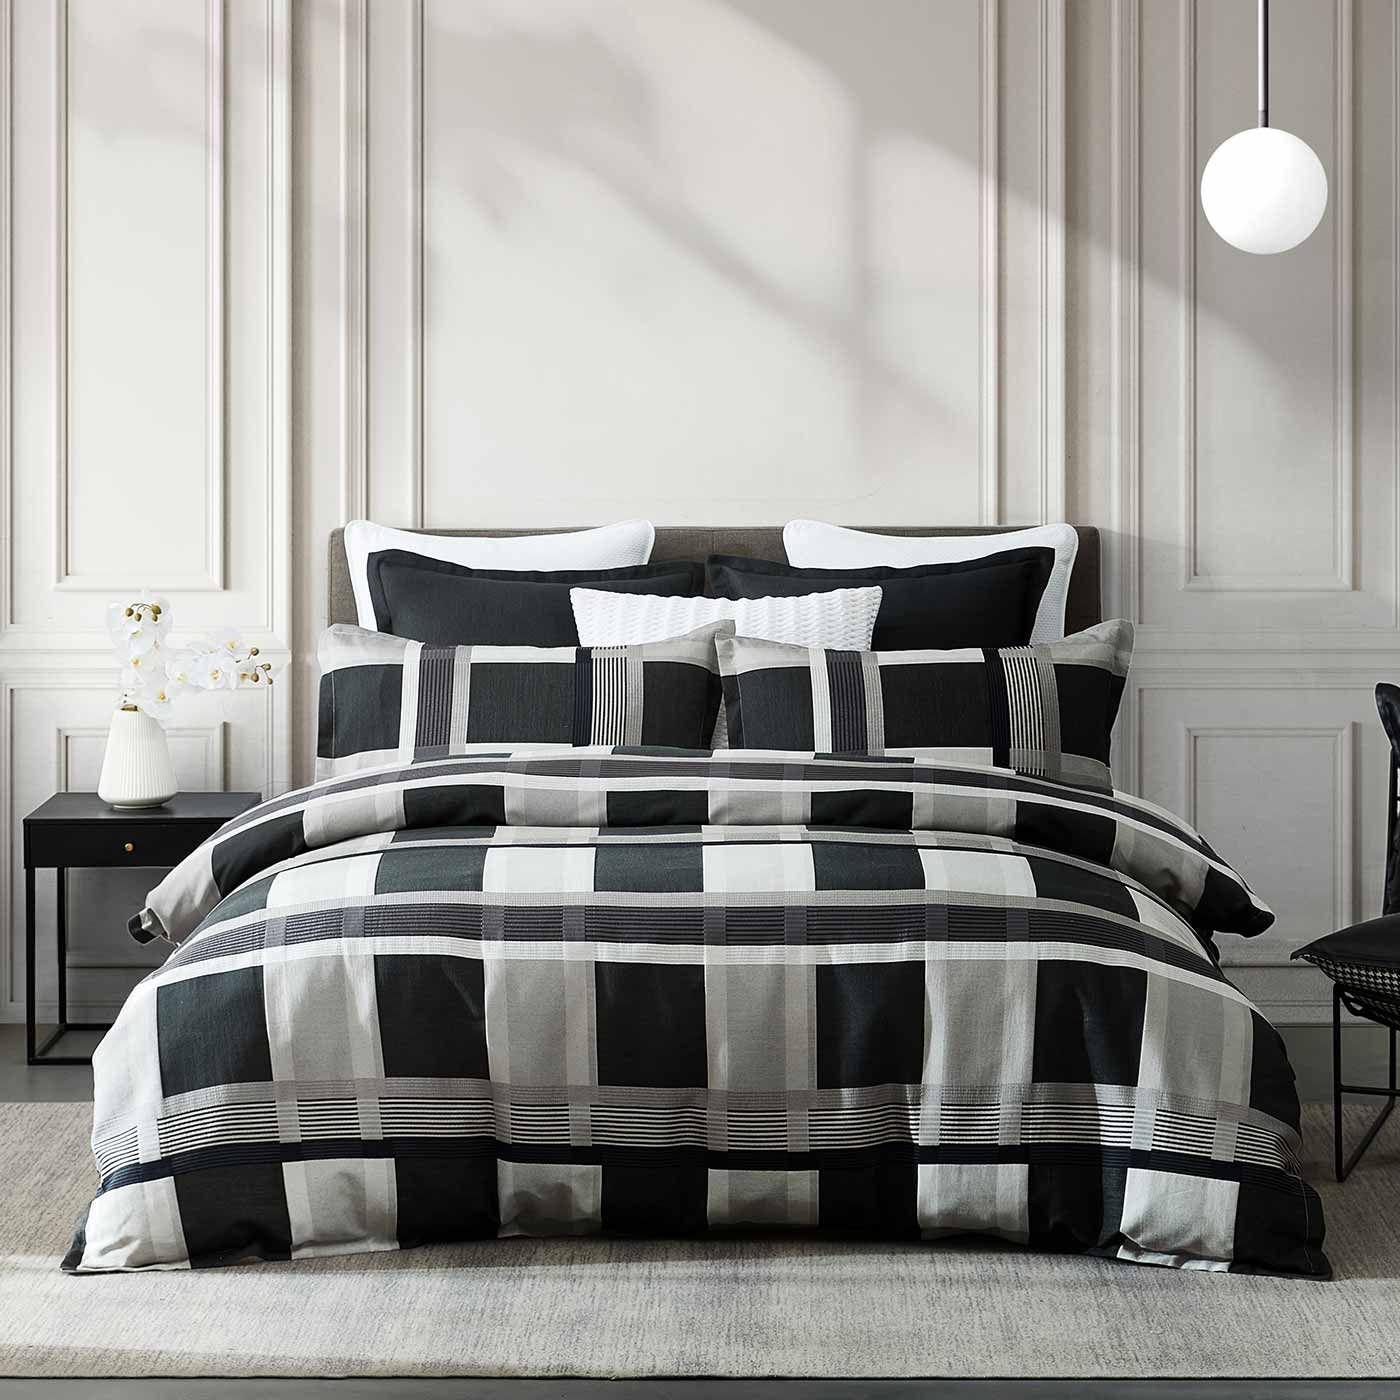 Private Collection is an iconic Australian bedding brand, Designed in Sydney Australia, its focus is on timeless style and luxury fabrics. With a complete range of bed linen including quilt covers, sheet sets and decorator cushions.